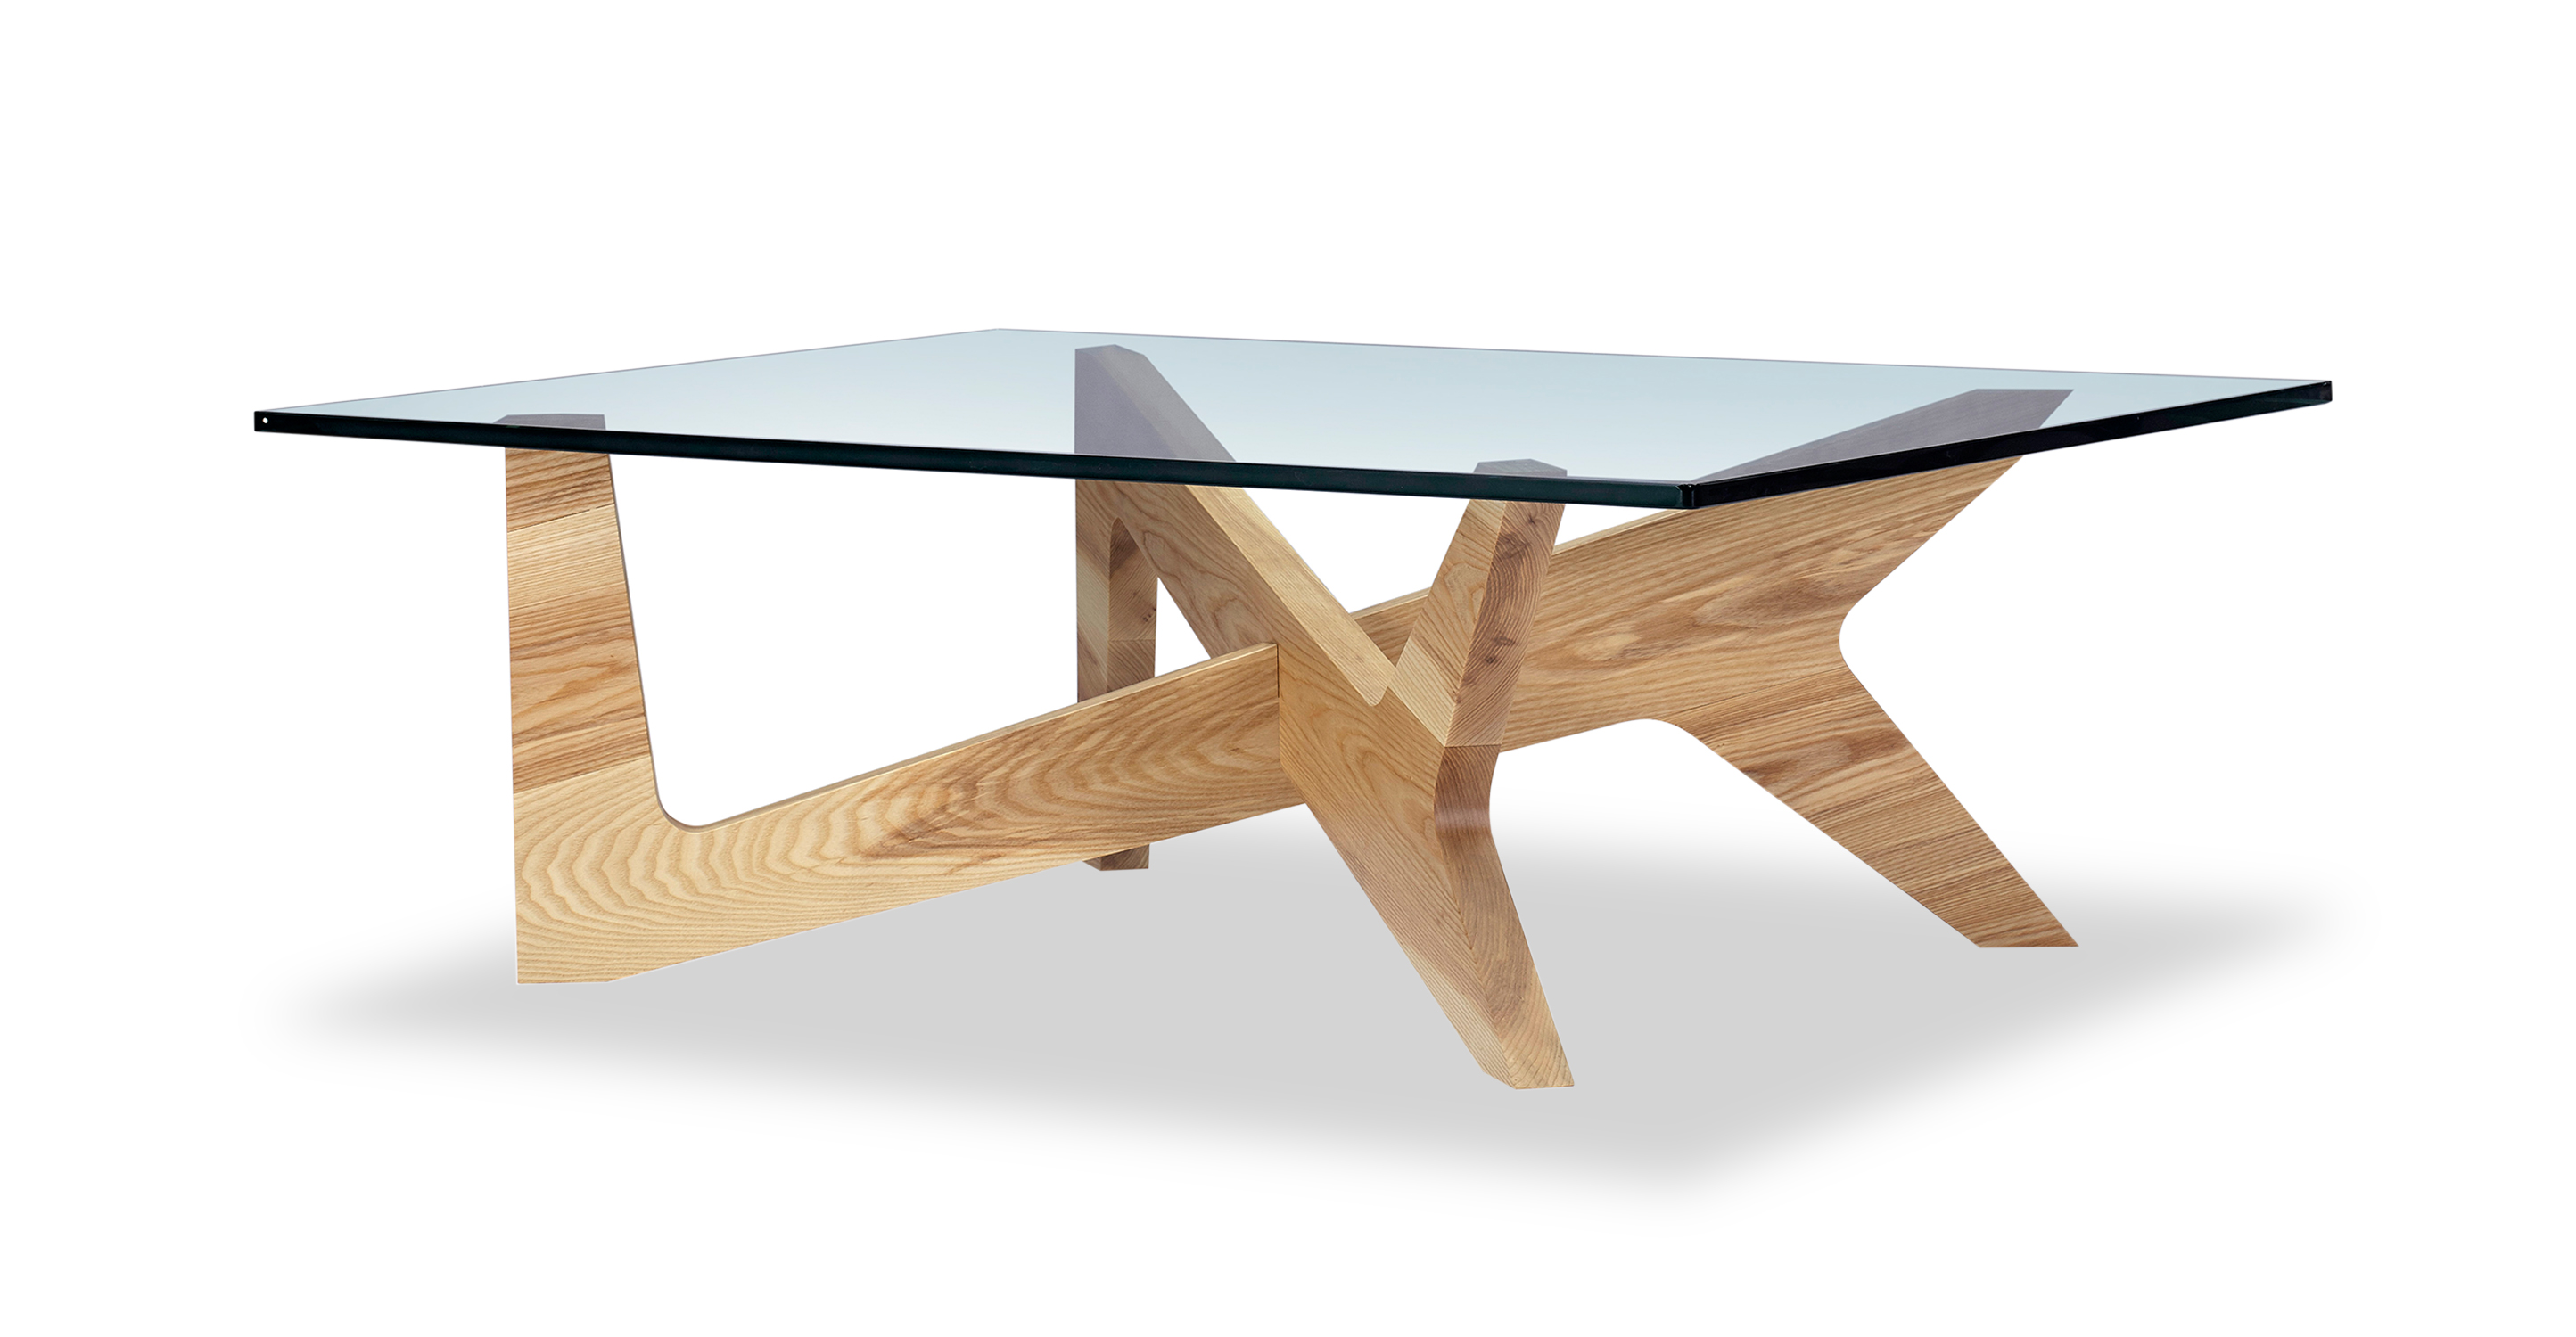 The Cross coffee table has a natural wood base and a glass top. The base supports the table from 4 points. There are two base pieces that cross each other in the center. Each base piece's shape looks like a Y on one end and an L on the other end. The vibe is modern wooden sculpture-esque, high-end design.